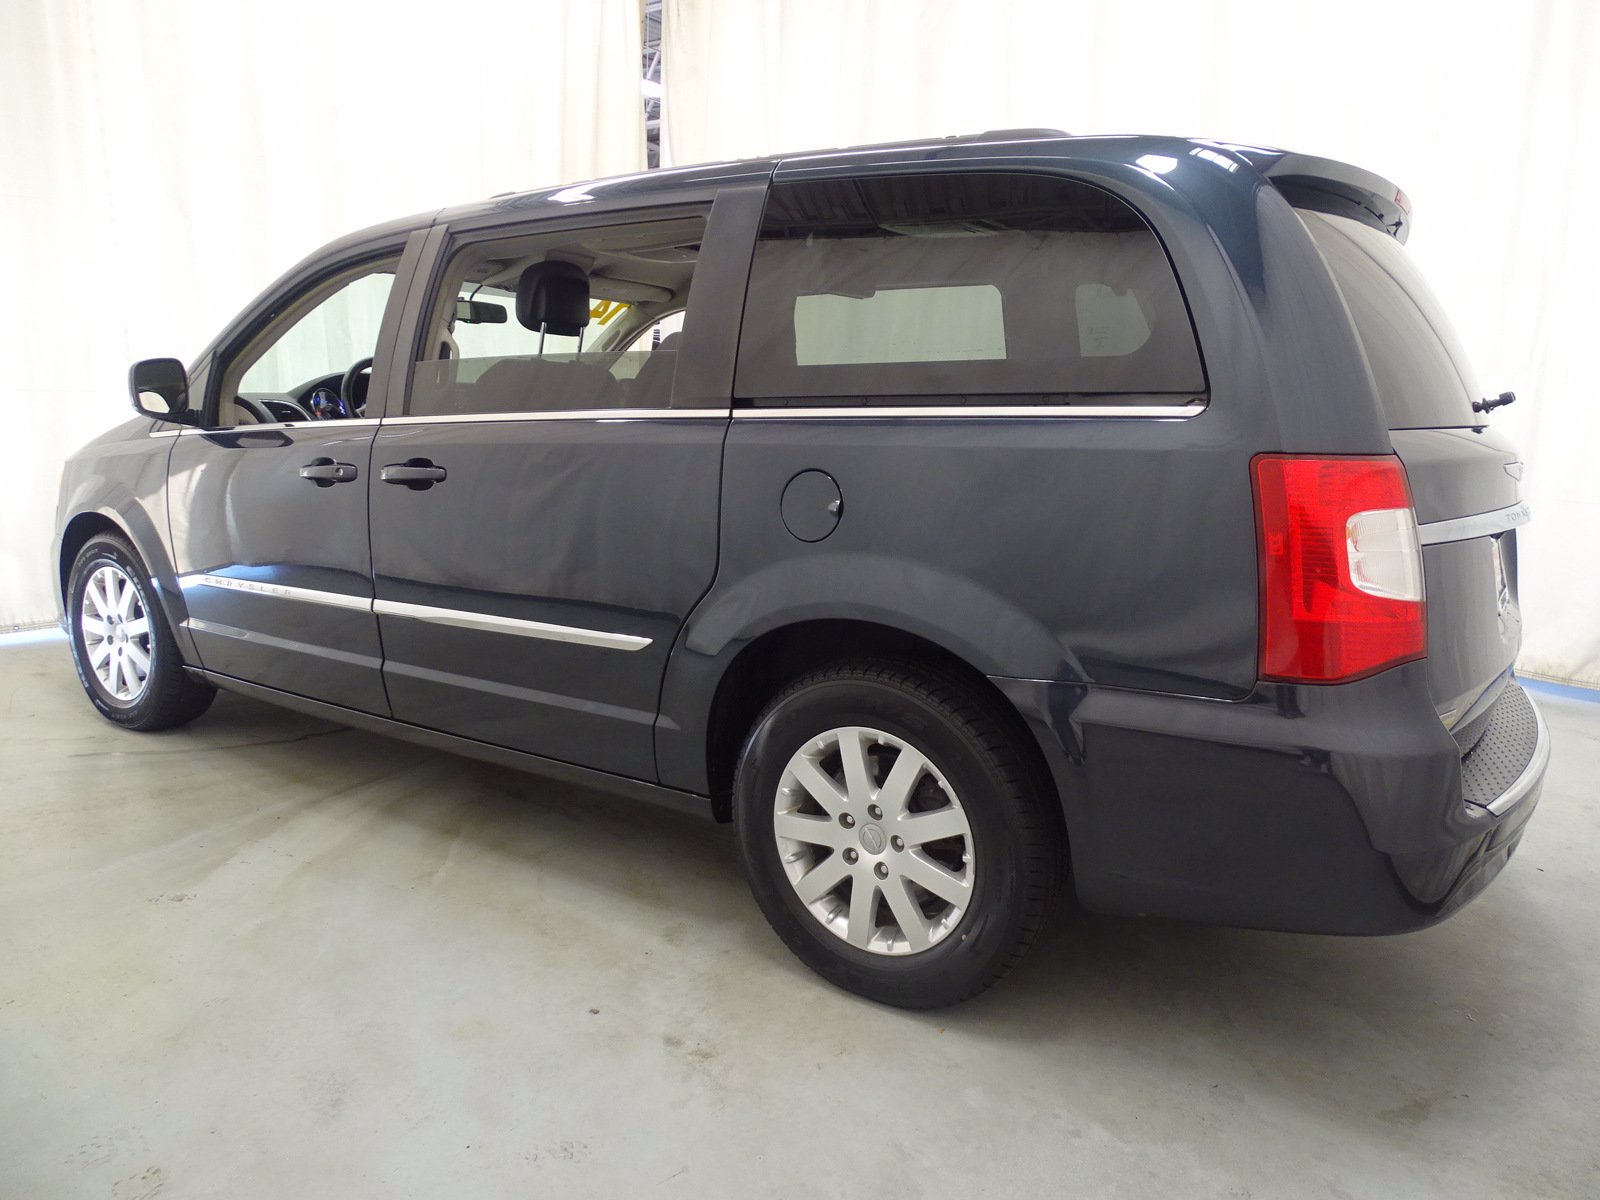 PreOwned 2014 Chrysler Town & Country Touring FWD Mini